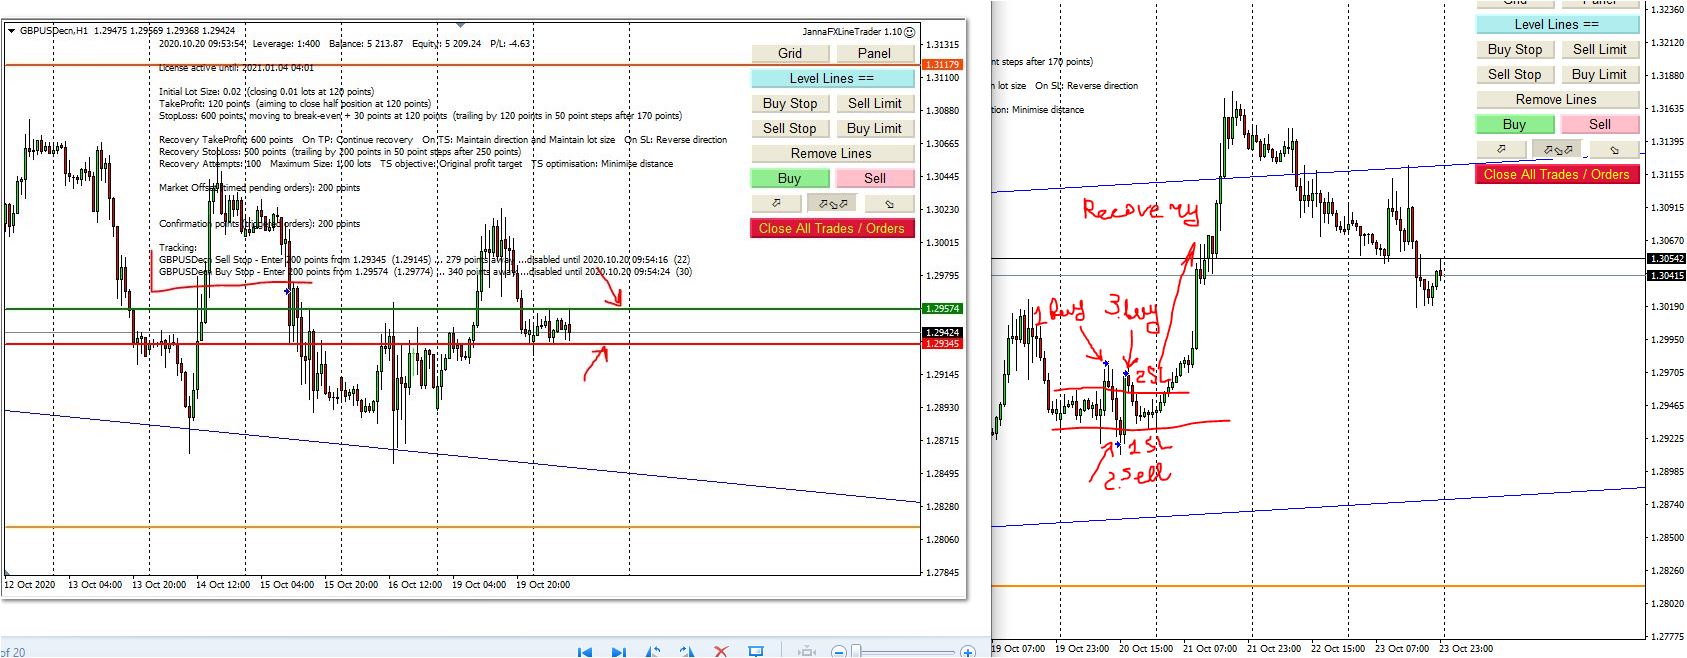 Weekly Forex Analysis, 26th -30th October 2020, My Trading Plan